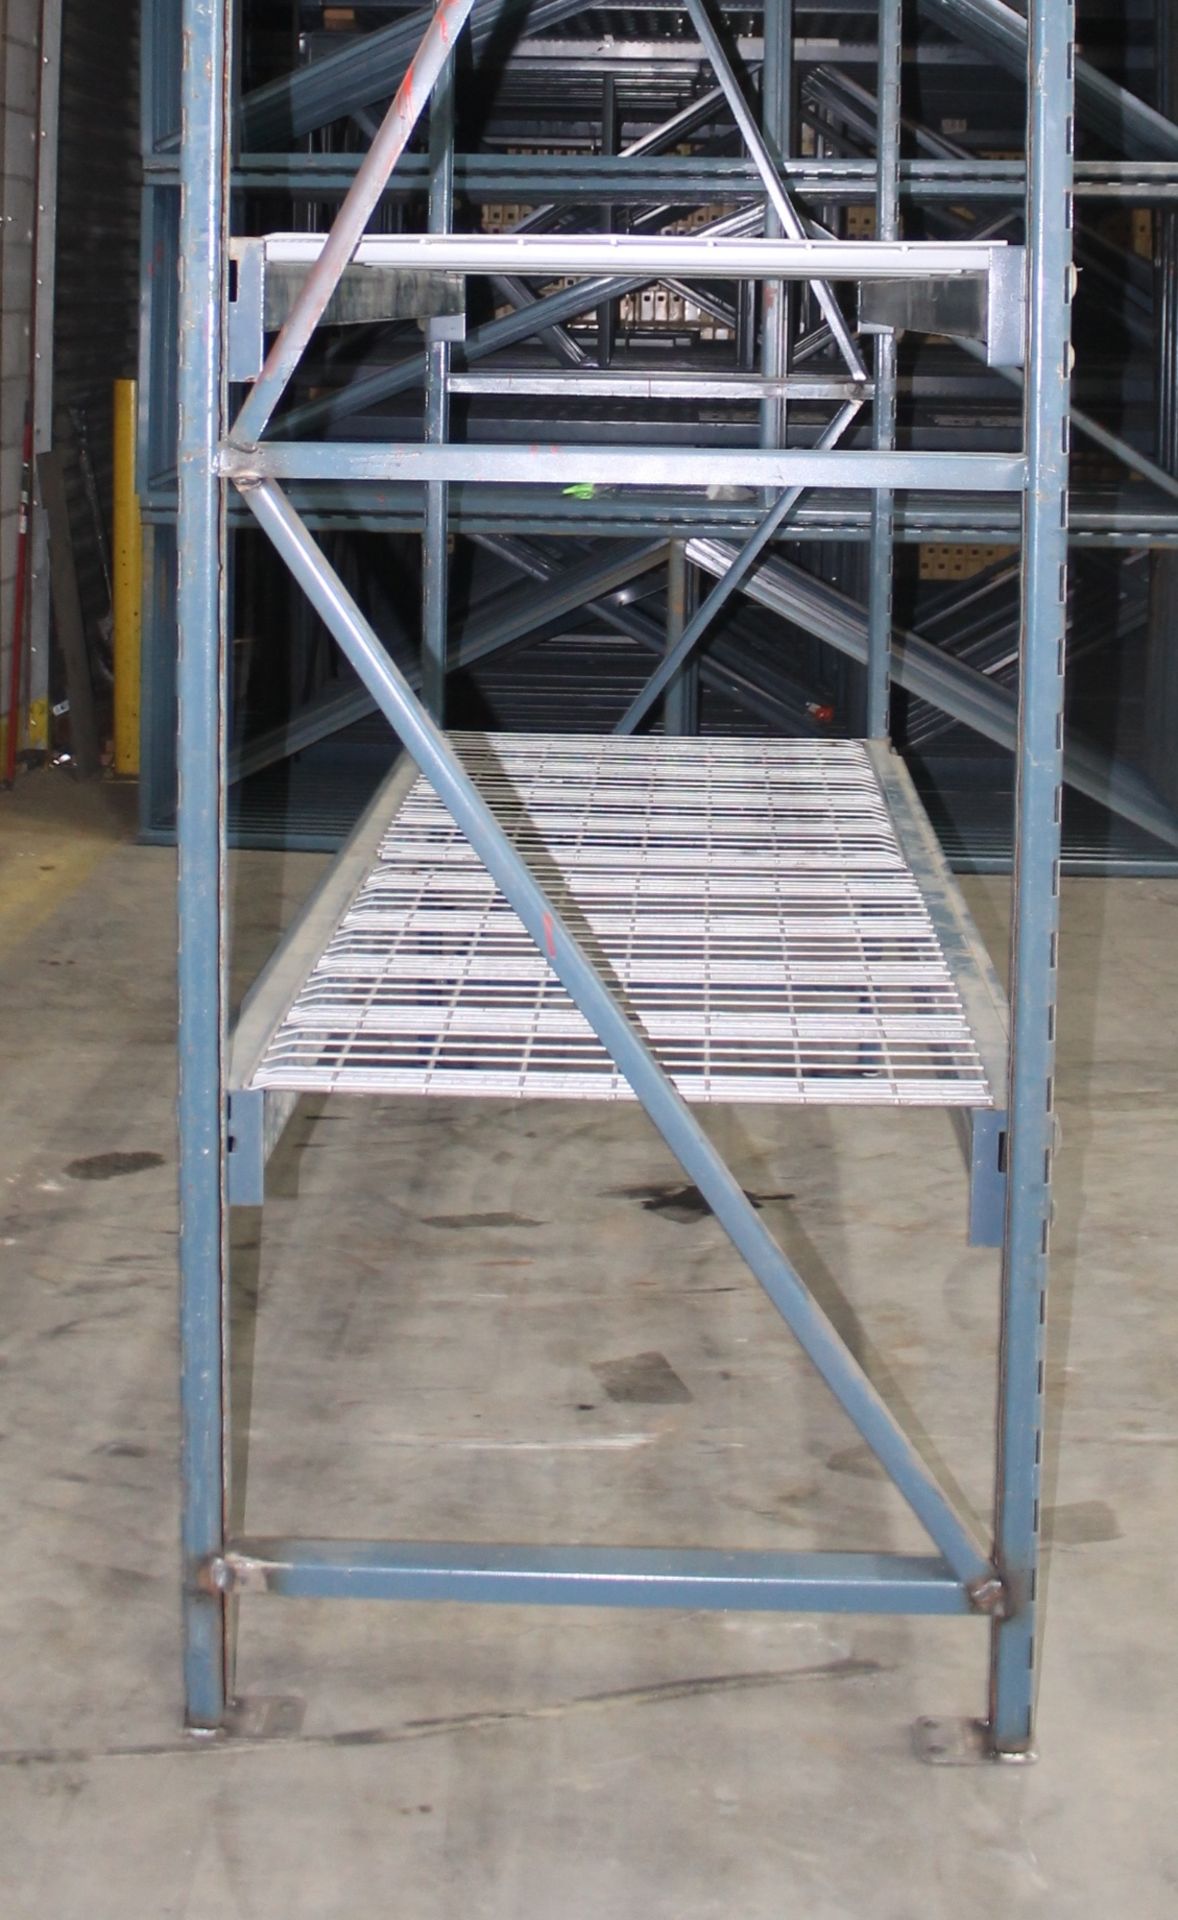 96"H X 36"D X 96"L STOCK ROOM SHELVING, TOTAL 10 SECTIONS WITH 2 BEAM LEVELS EACH,  INCLUDES - Image 6 of 9